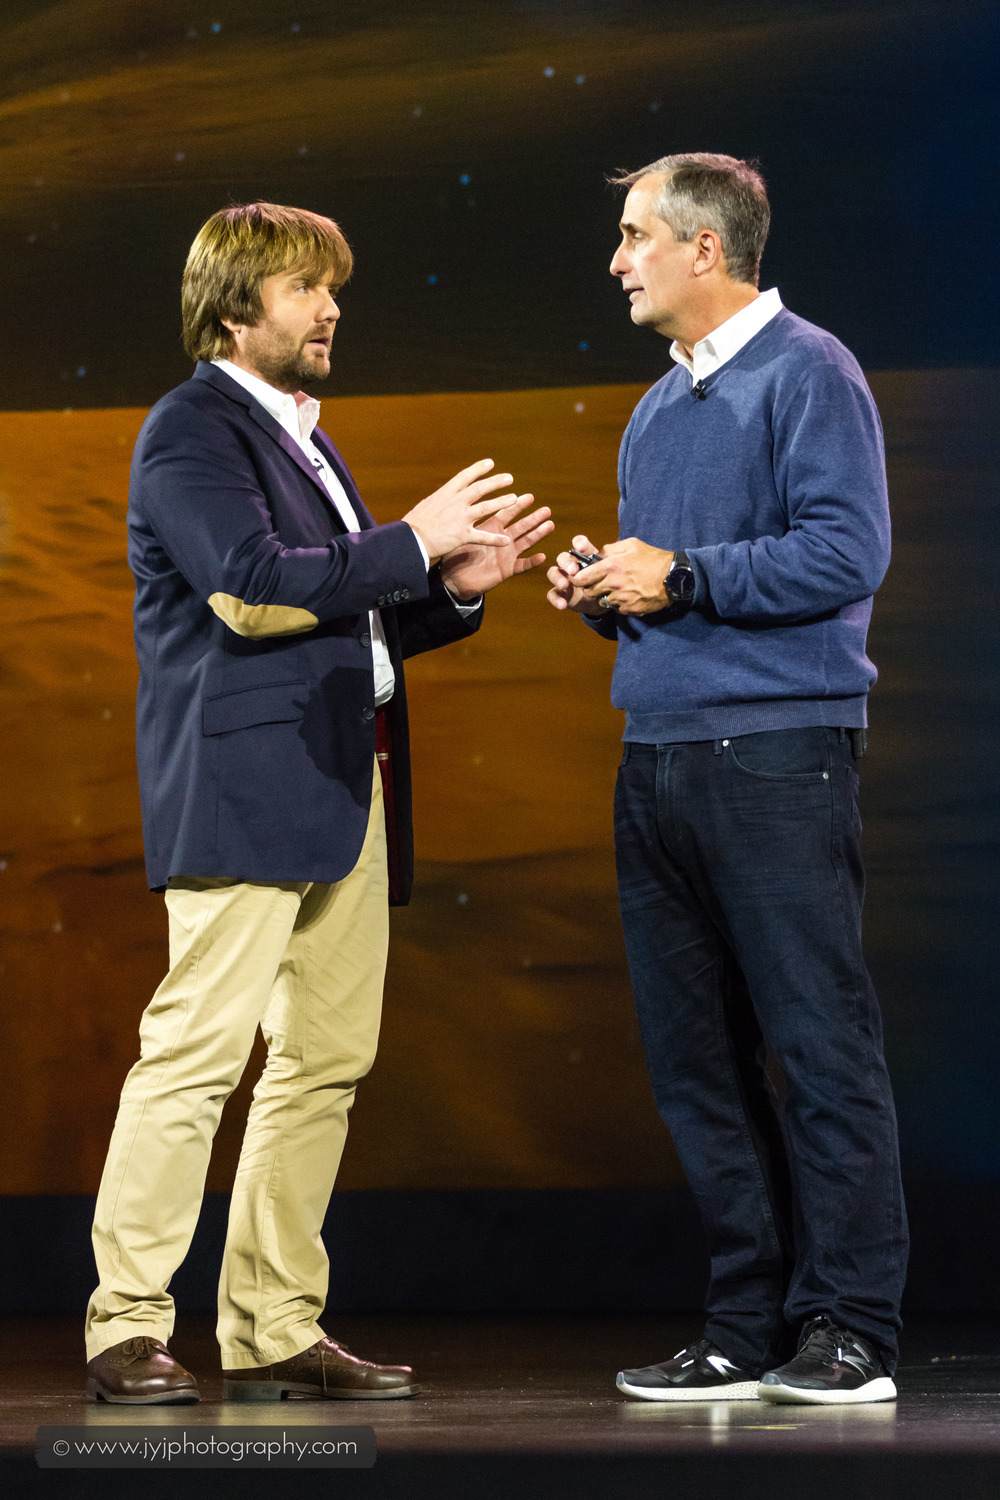  Andreas Gall and Brian Krzanich 